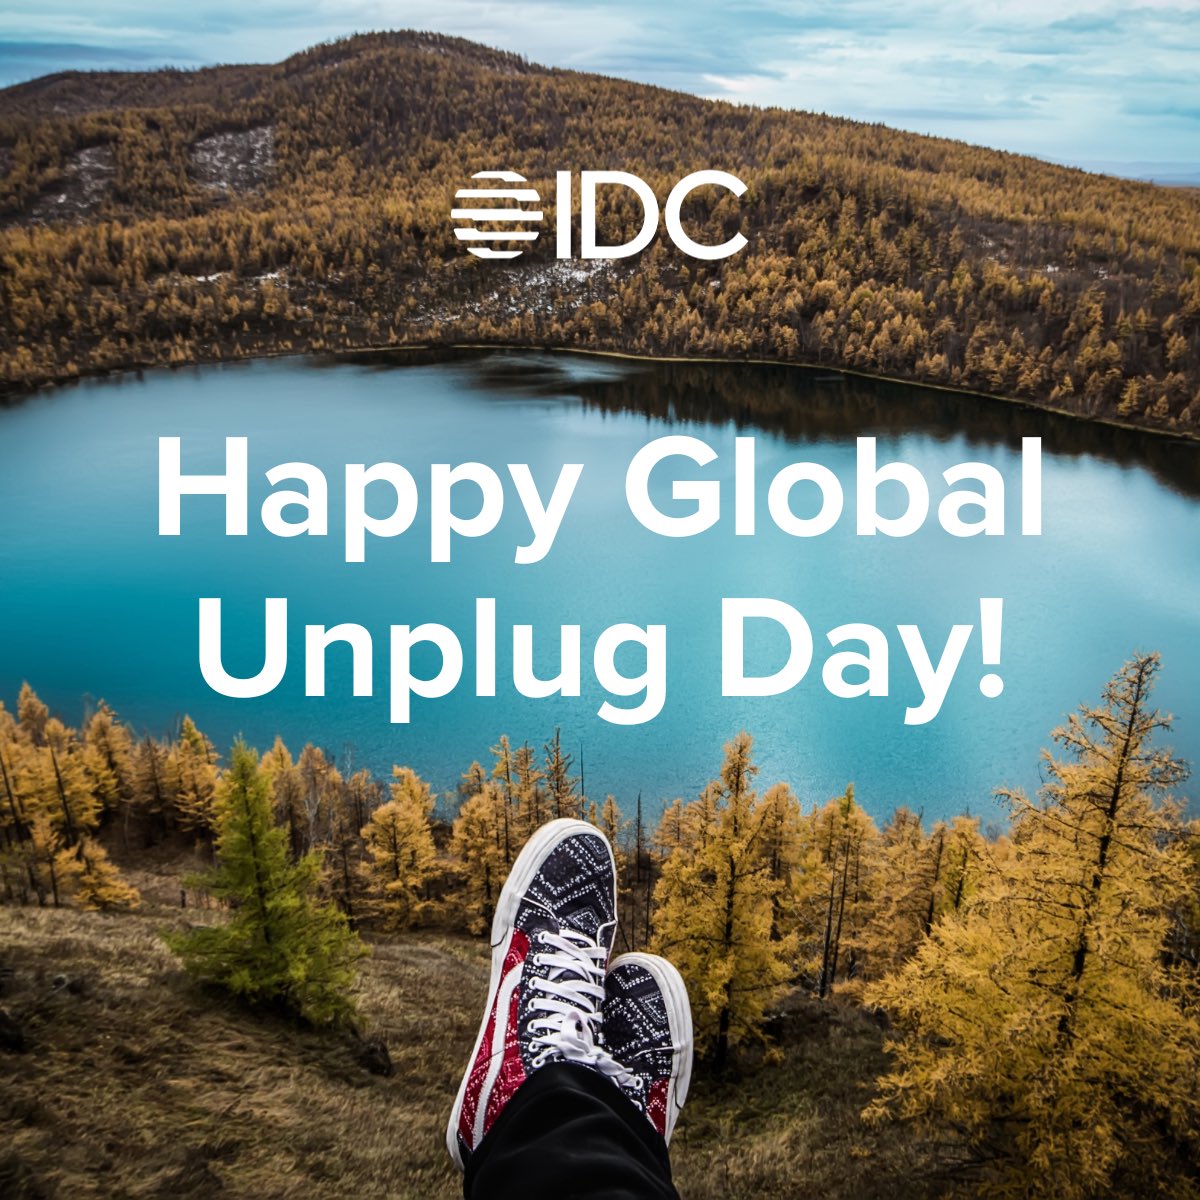 Technology moves fast. Sometimes you need to take a break. Thank you to the WW @IDC team for all that you do every day to make our customers and company successful. Enjoy the day!